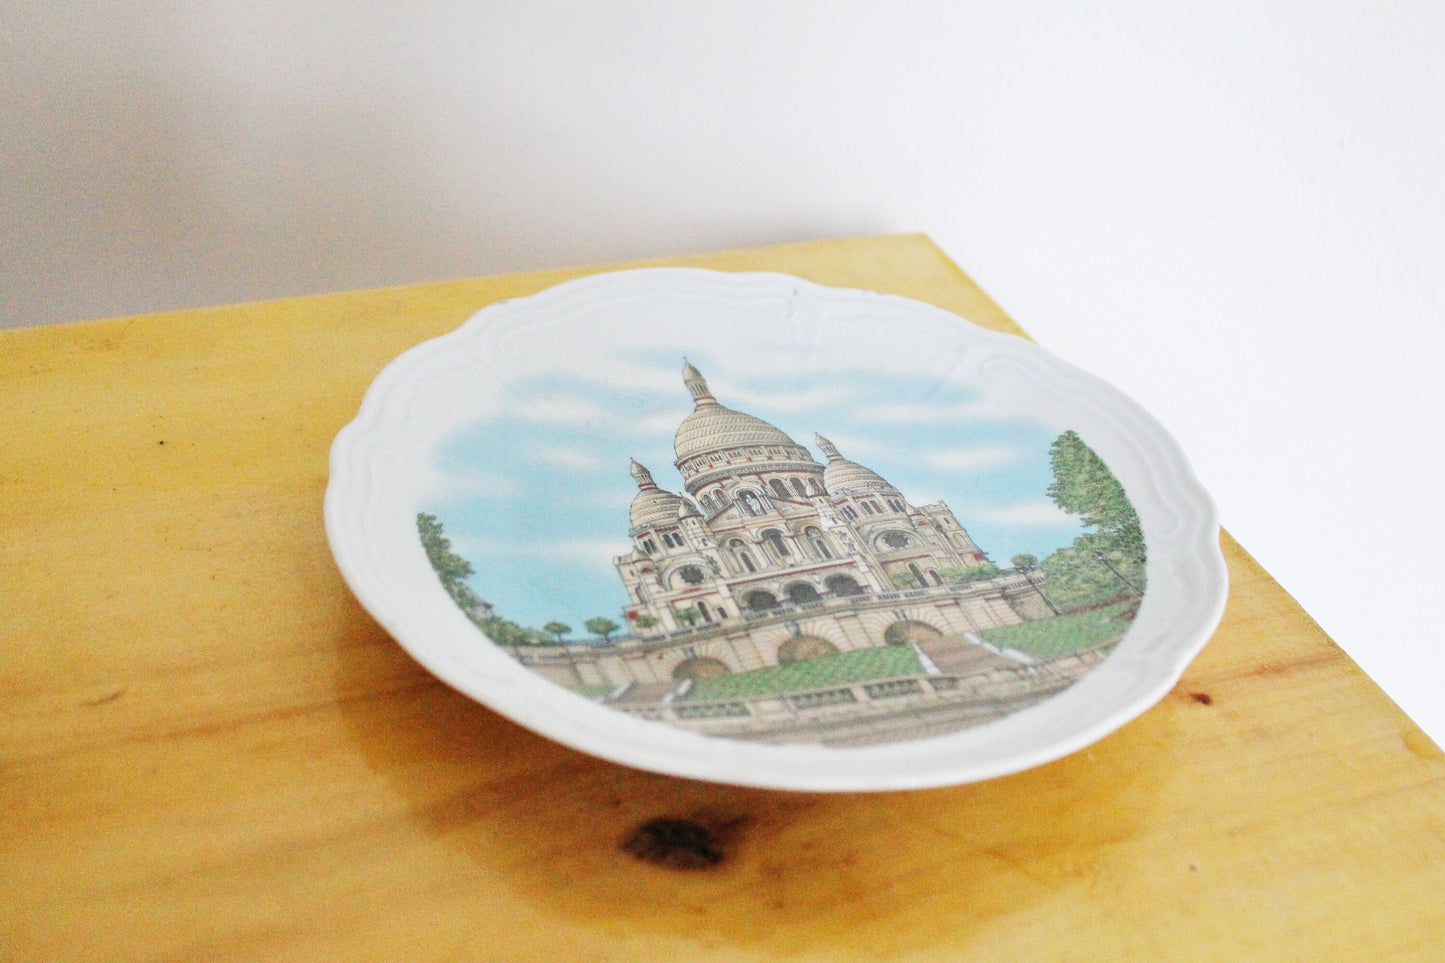 Vintage decorative porcelain wall plate 7.5 inches - Wunsiedel R Bavaria Plate - Germany 1970s